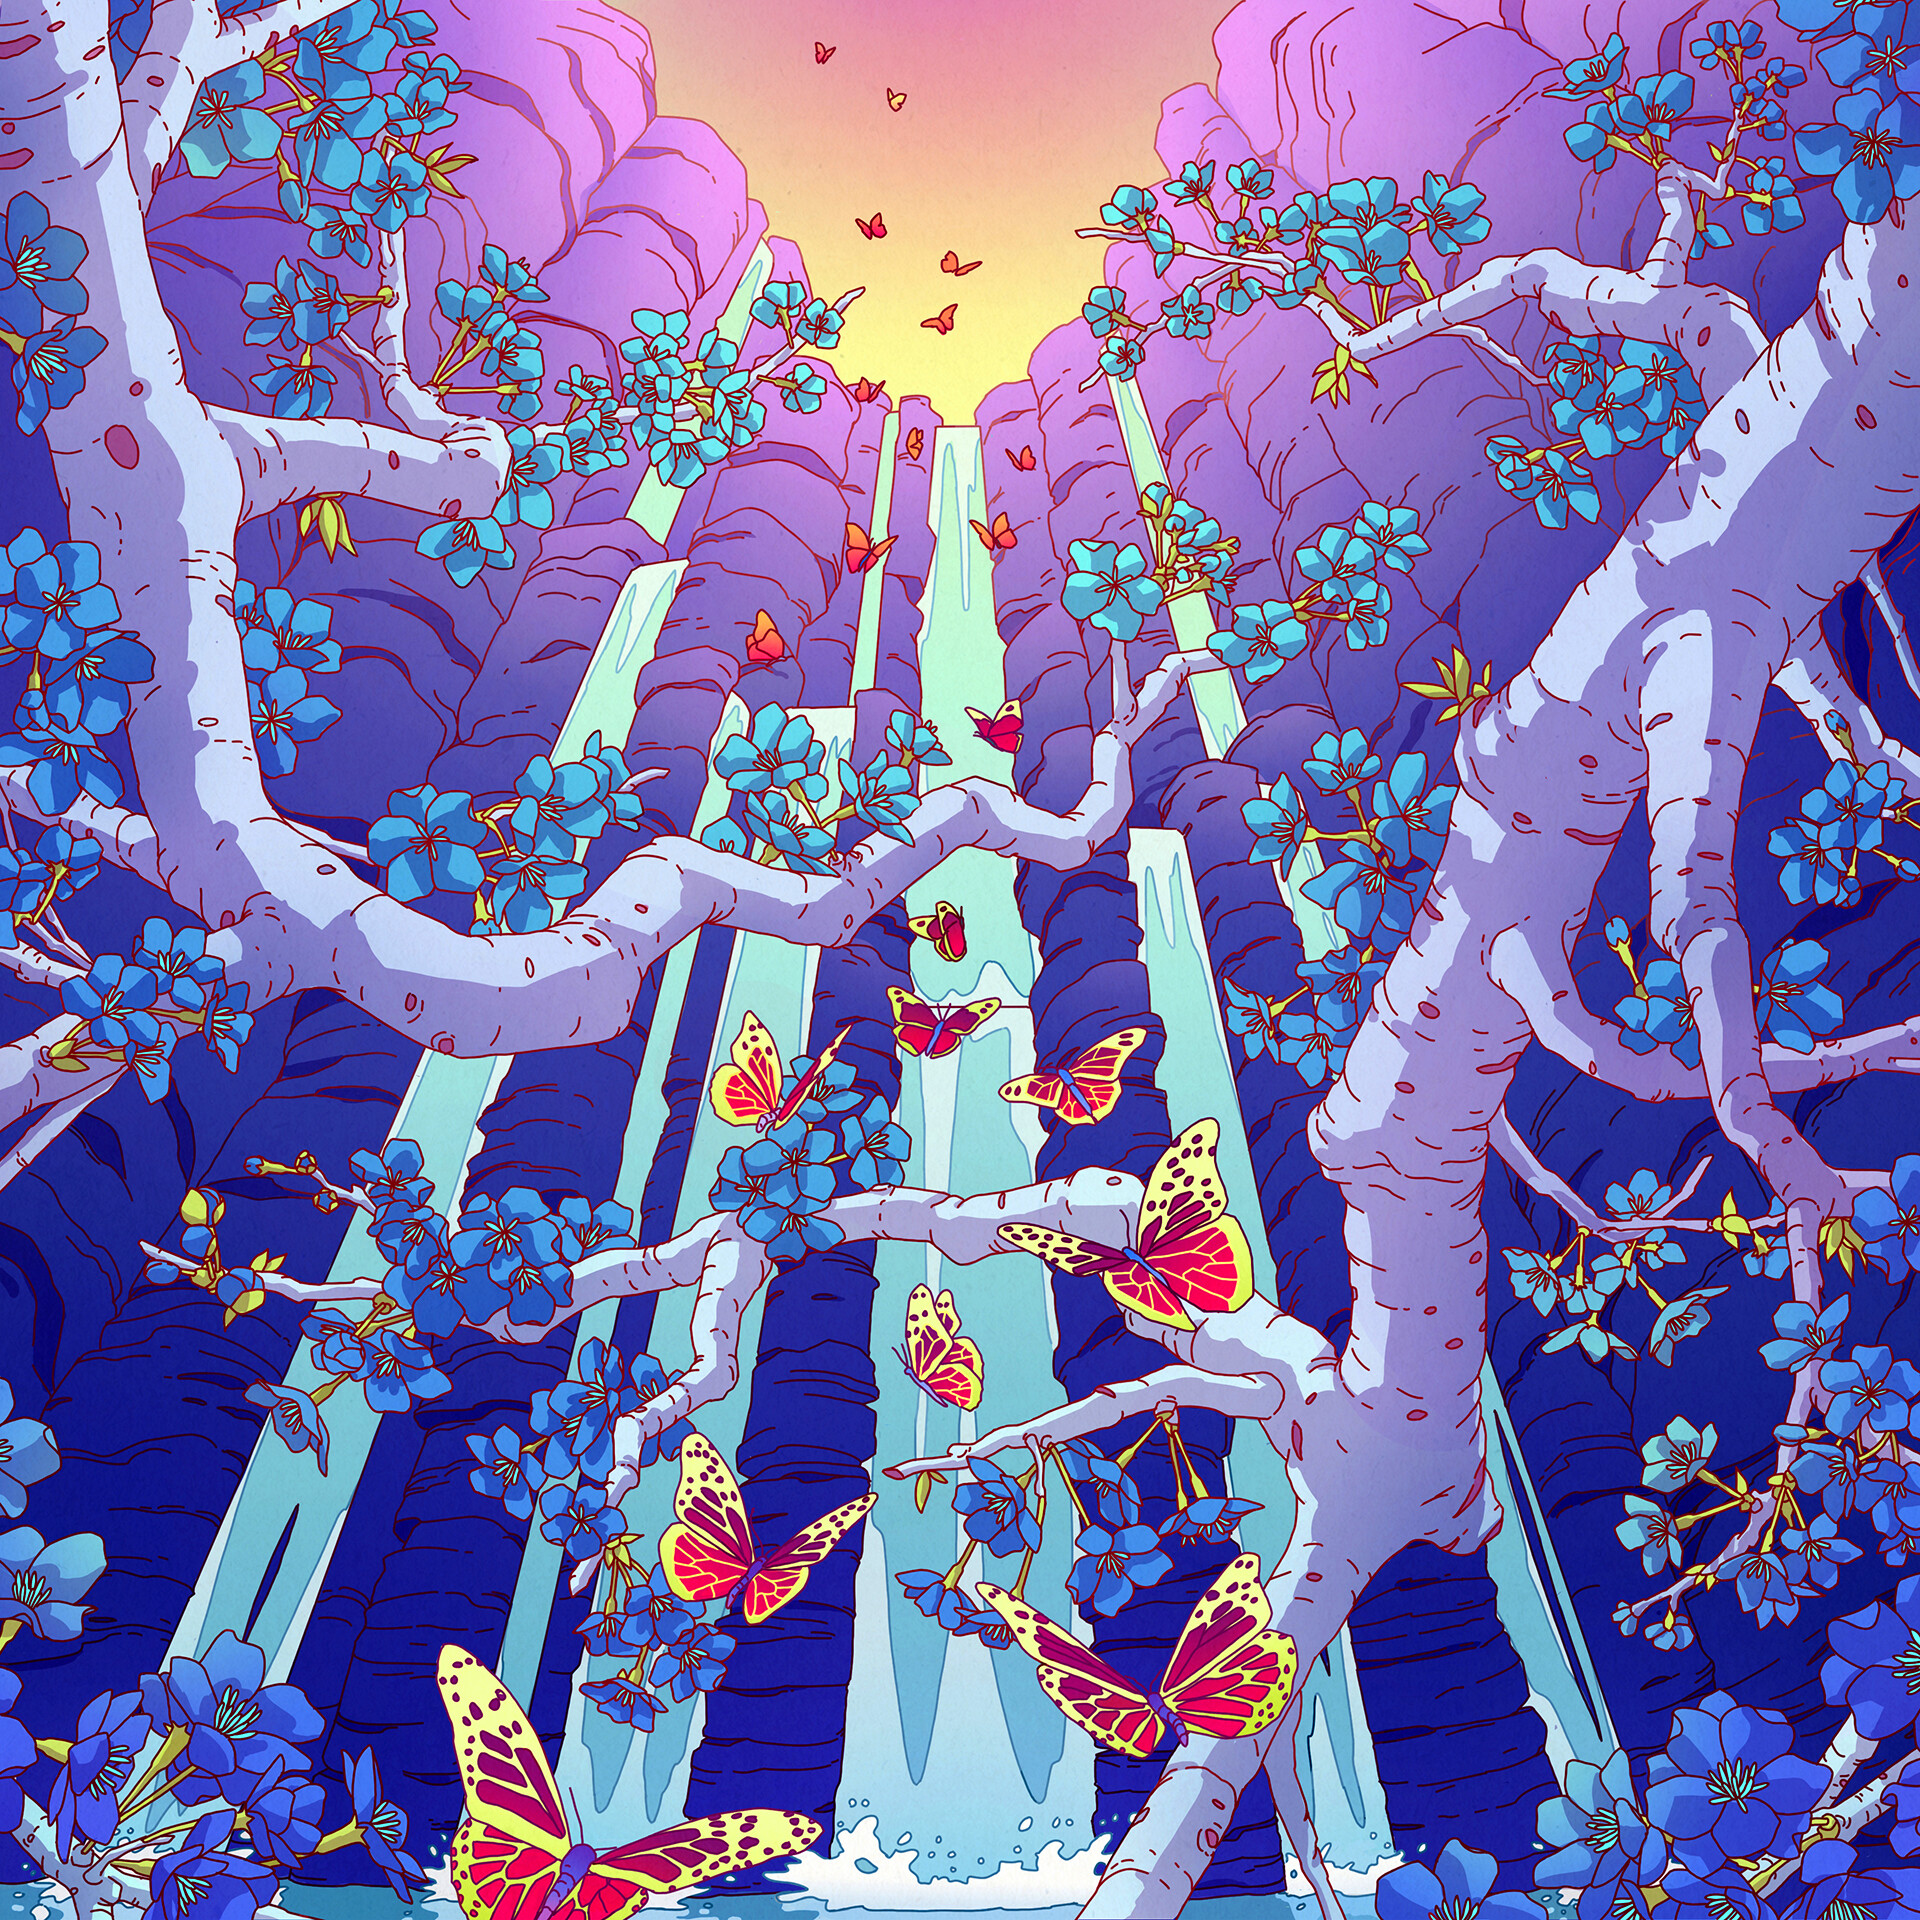 General 1920x1920 concept art illustration artwork waterfall nature colorful butterfly flowers Camila Nogueira